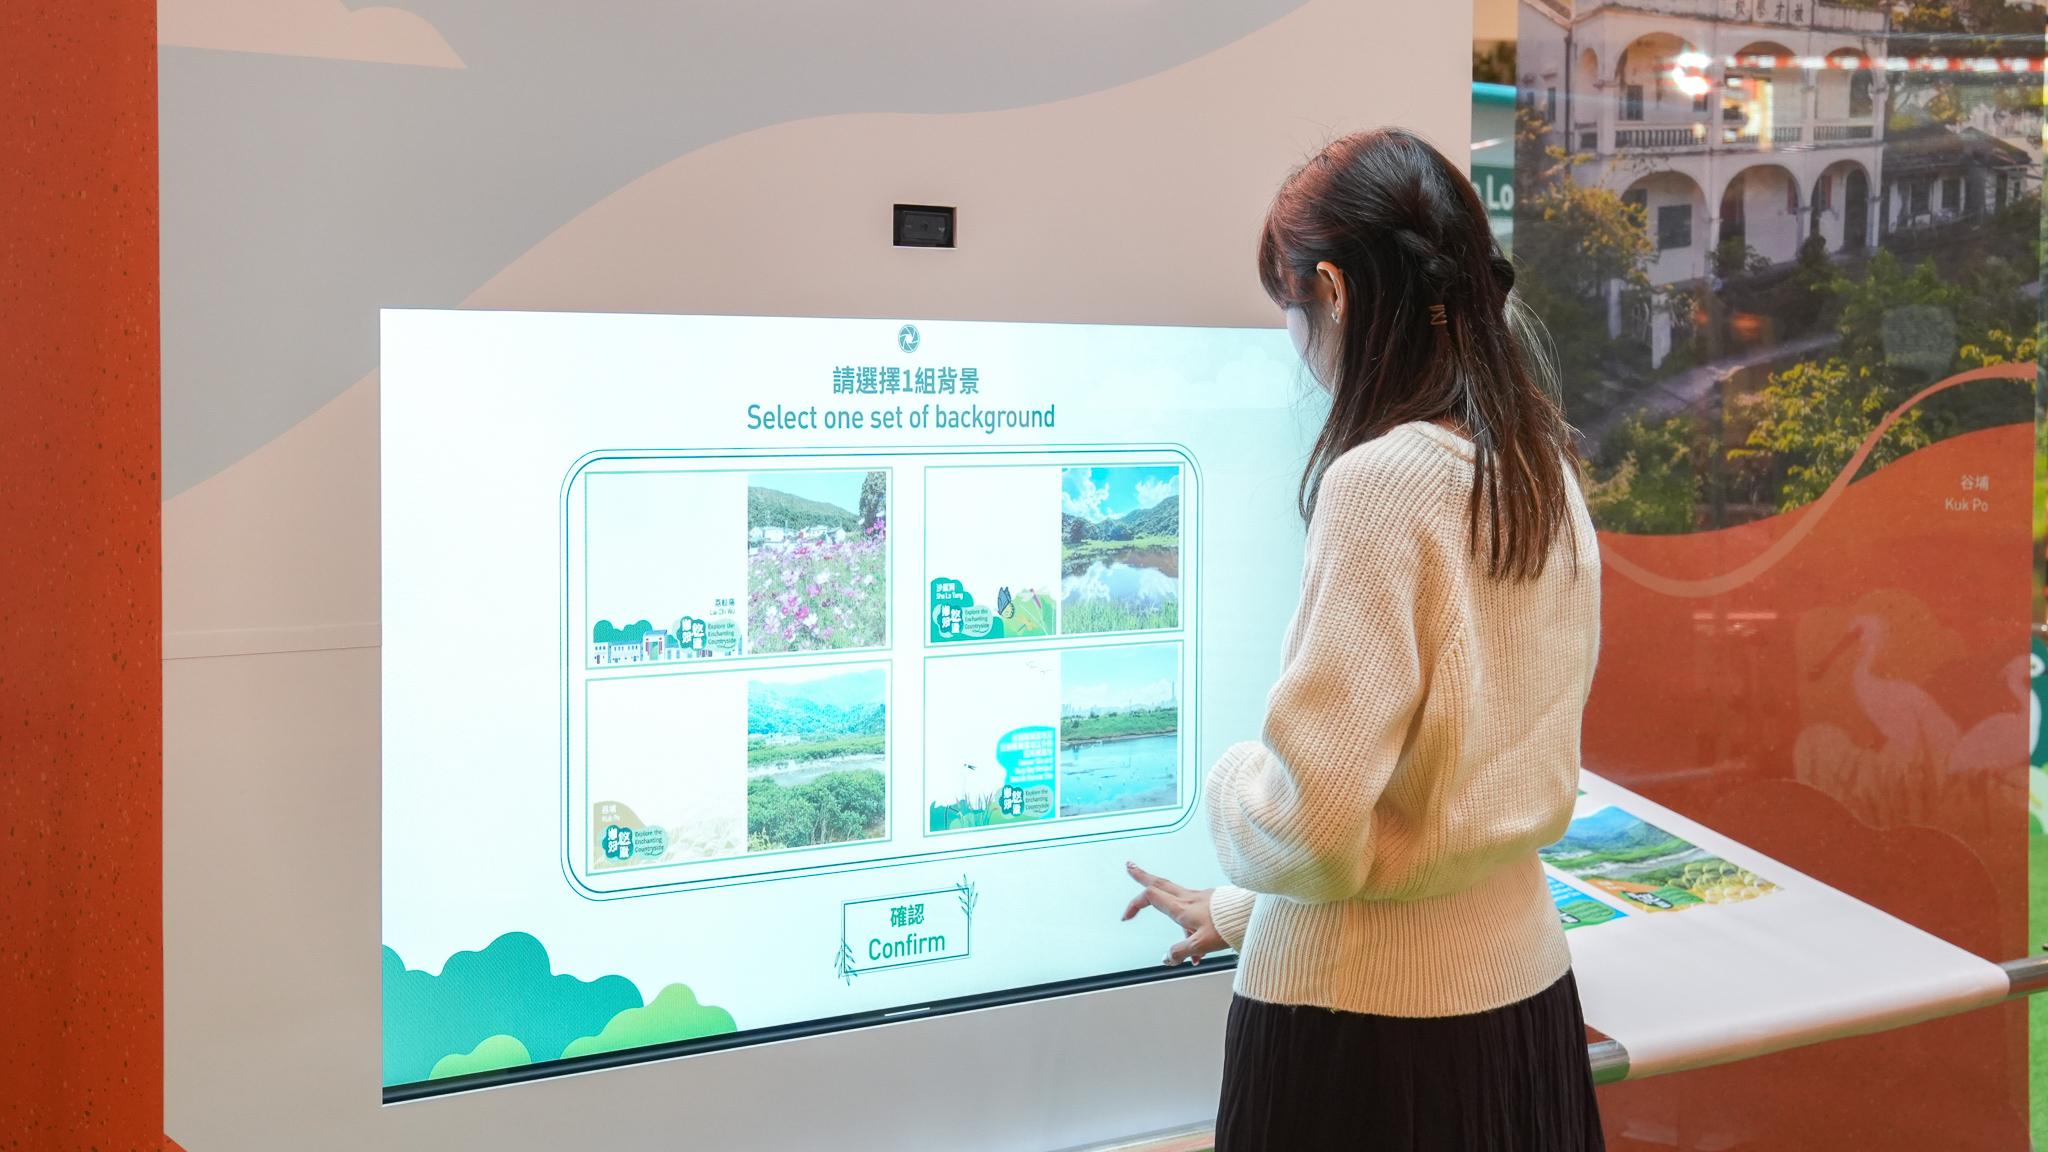 Organised by the Countryside Conservation Office, the roving exhibition entitled "Explore the Enchanting Countryside", will be launched tomorrow (February 20). The on-site games combine entertainment with education, allowing visitors to learn more about countryside revitalisation while having fun.